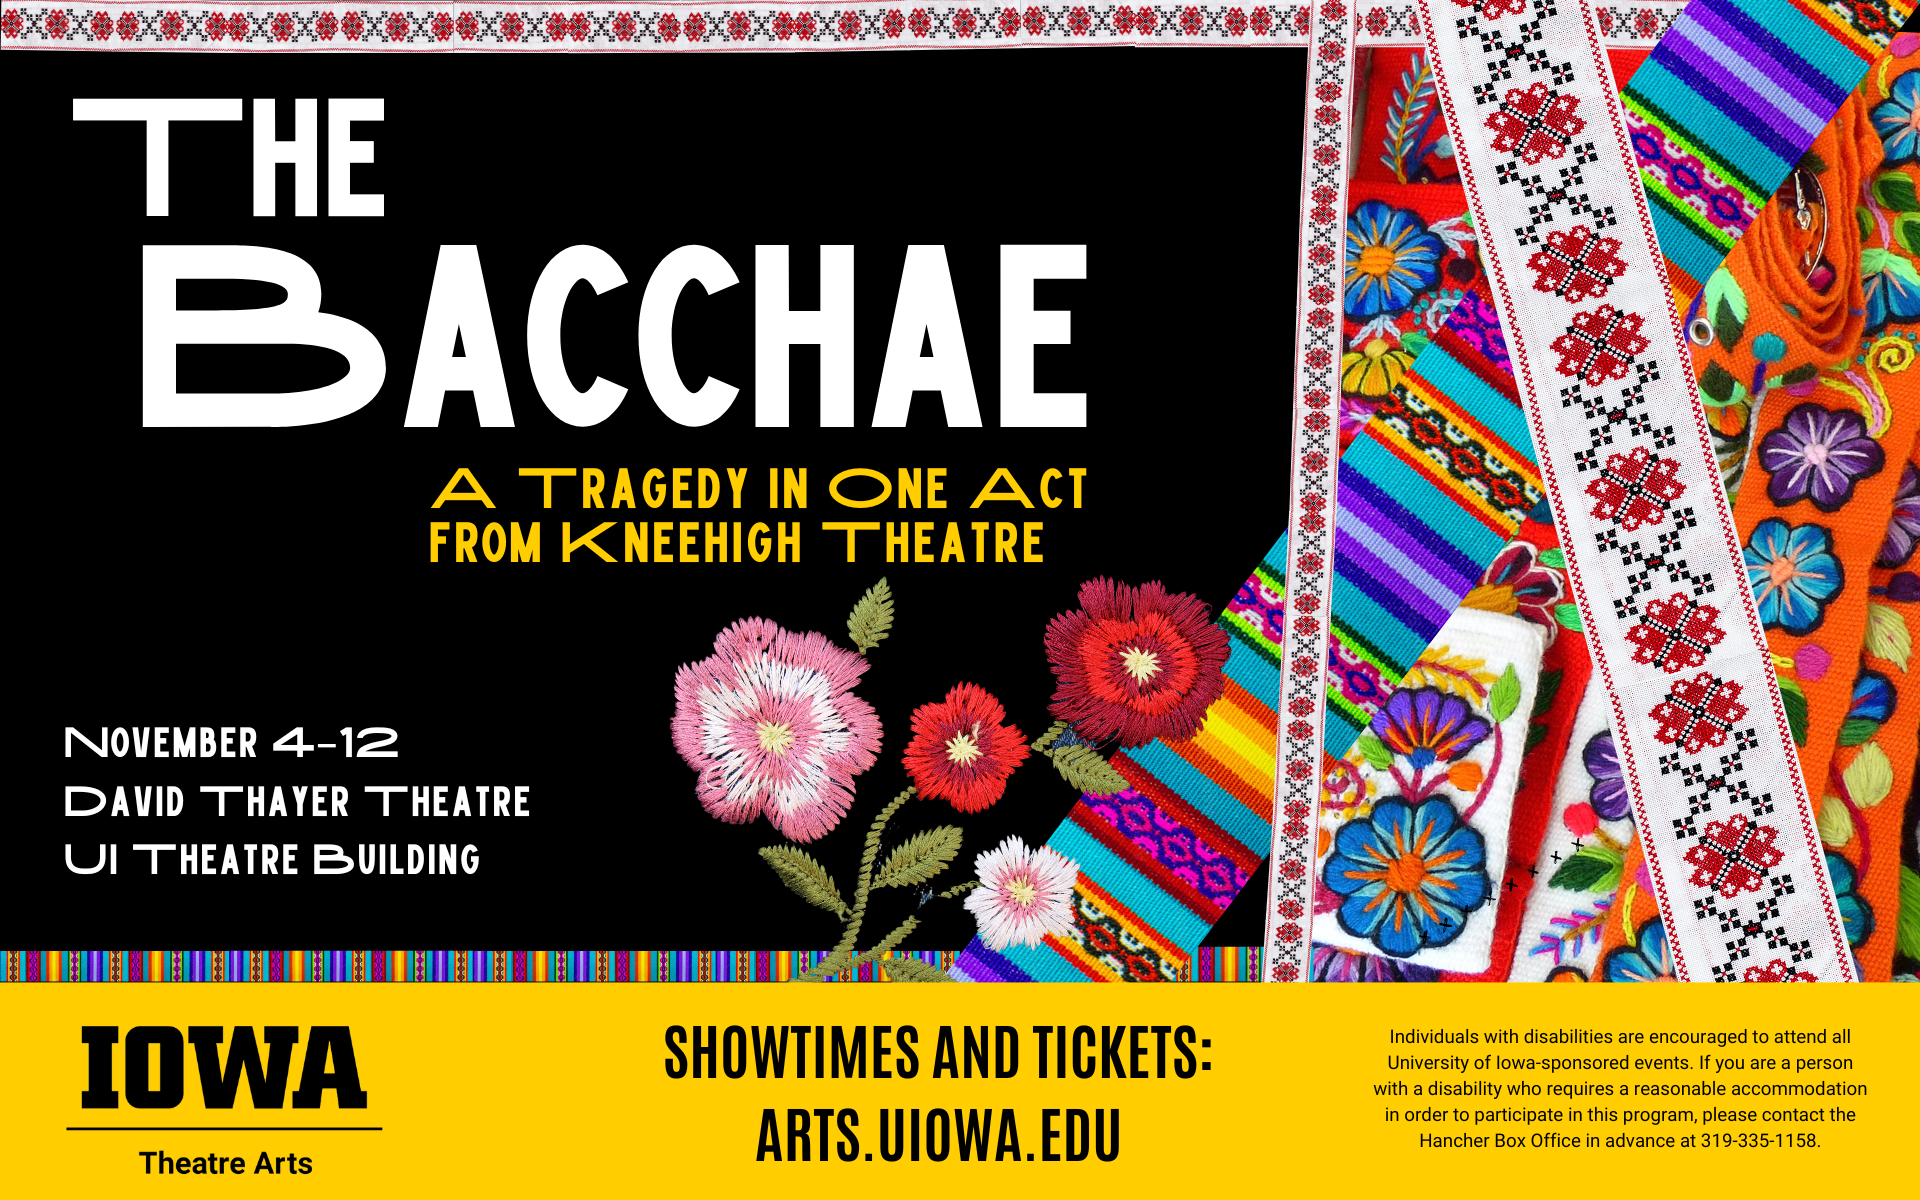 The Bacchae